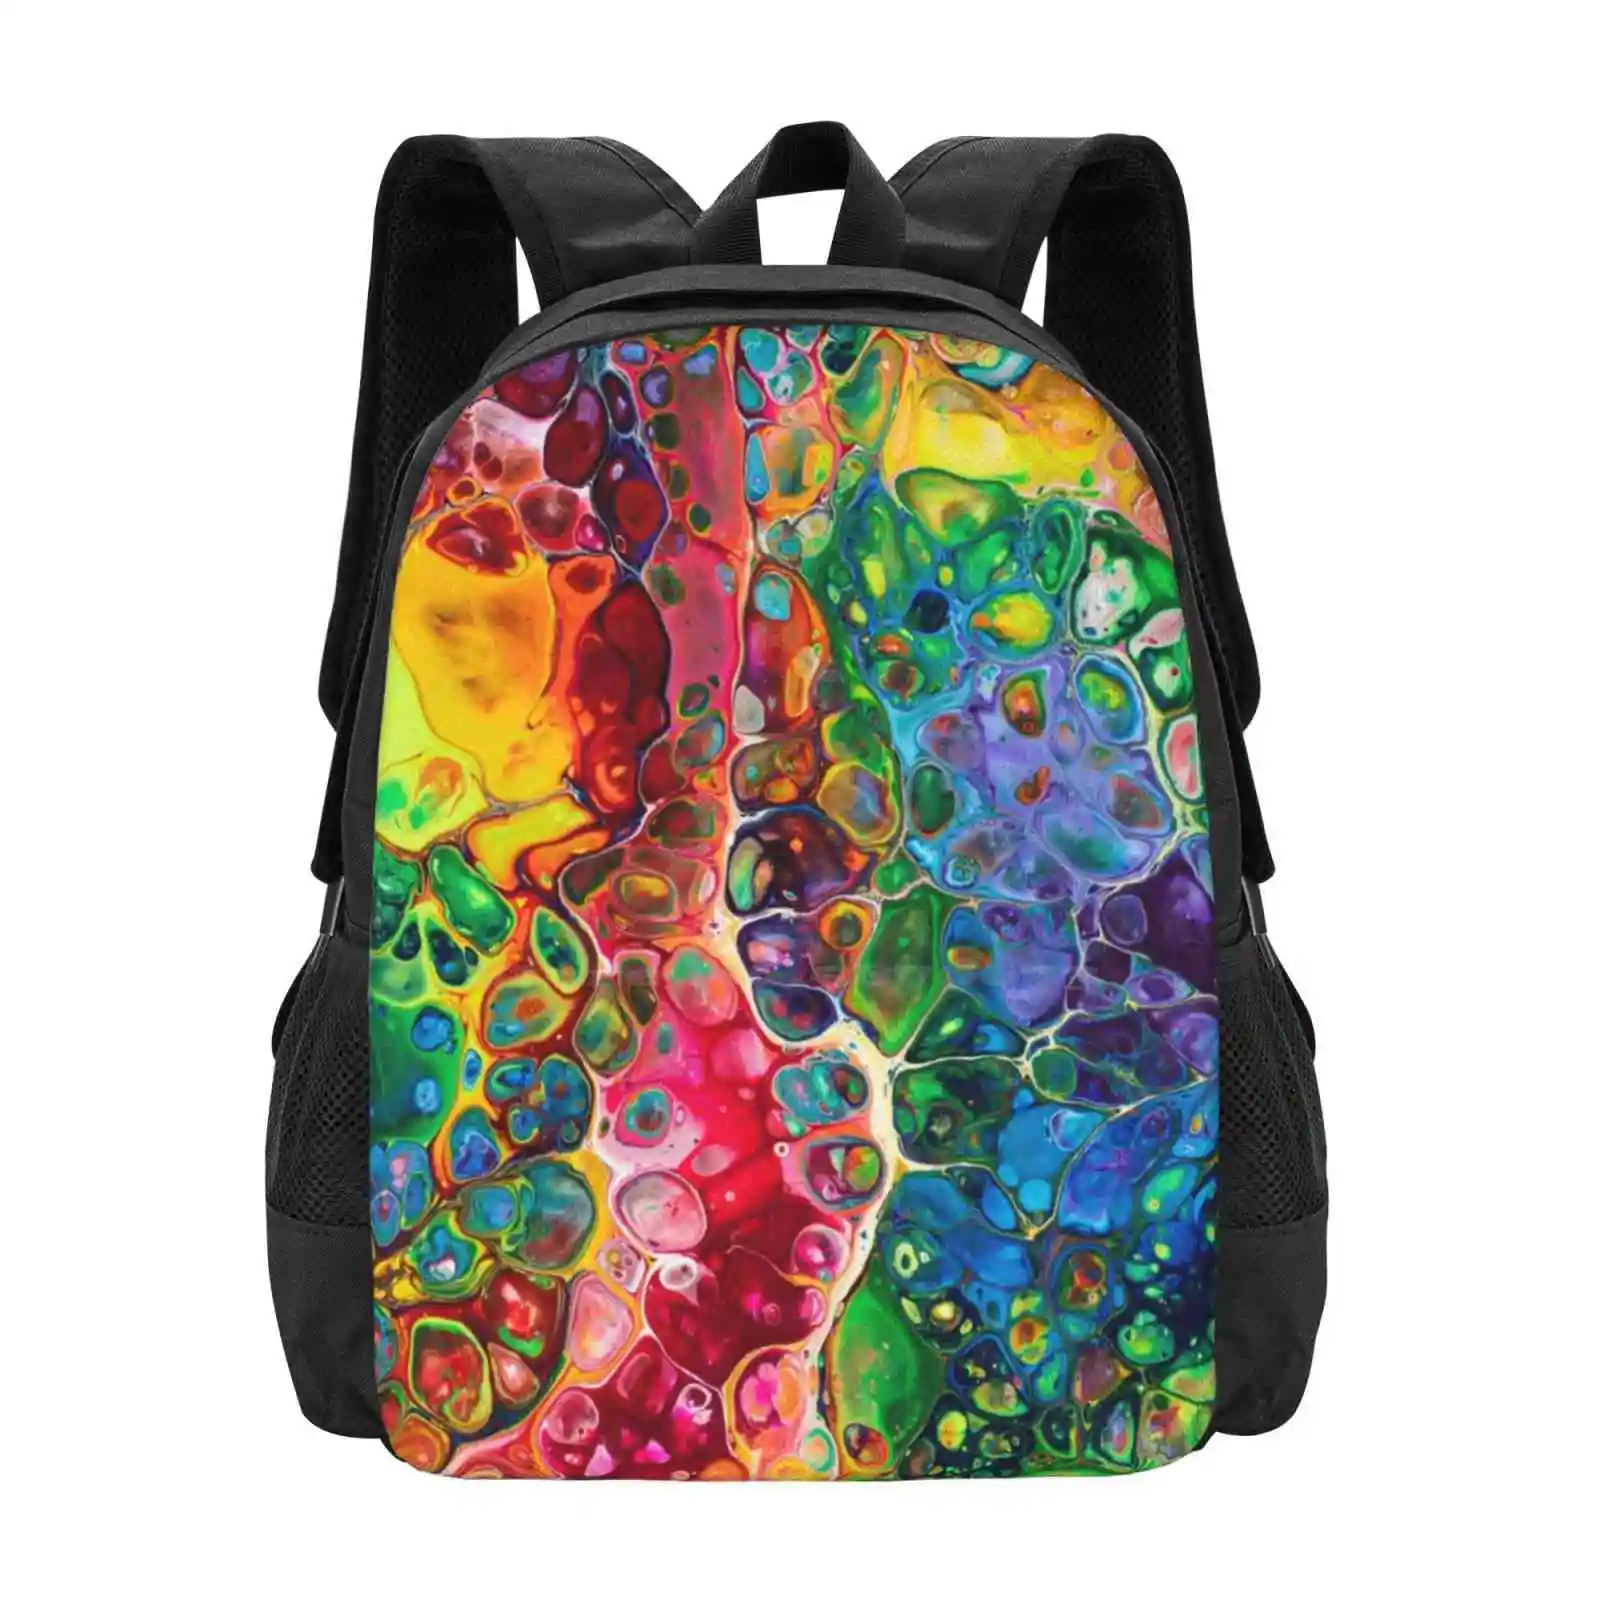 

Somewhere Over The Rainbow Pattern Design Bagpack School Bags Rainbow Abstract Fluid Art Artistic Expressions Ashley Carter